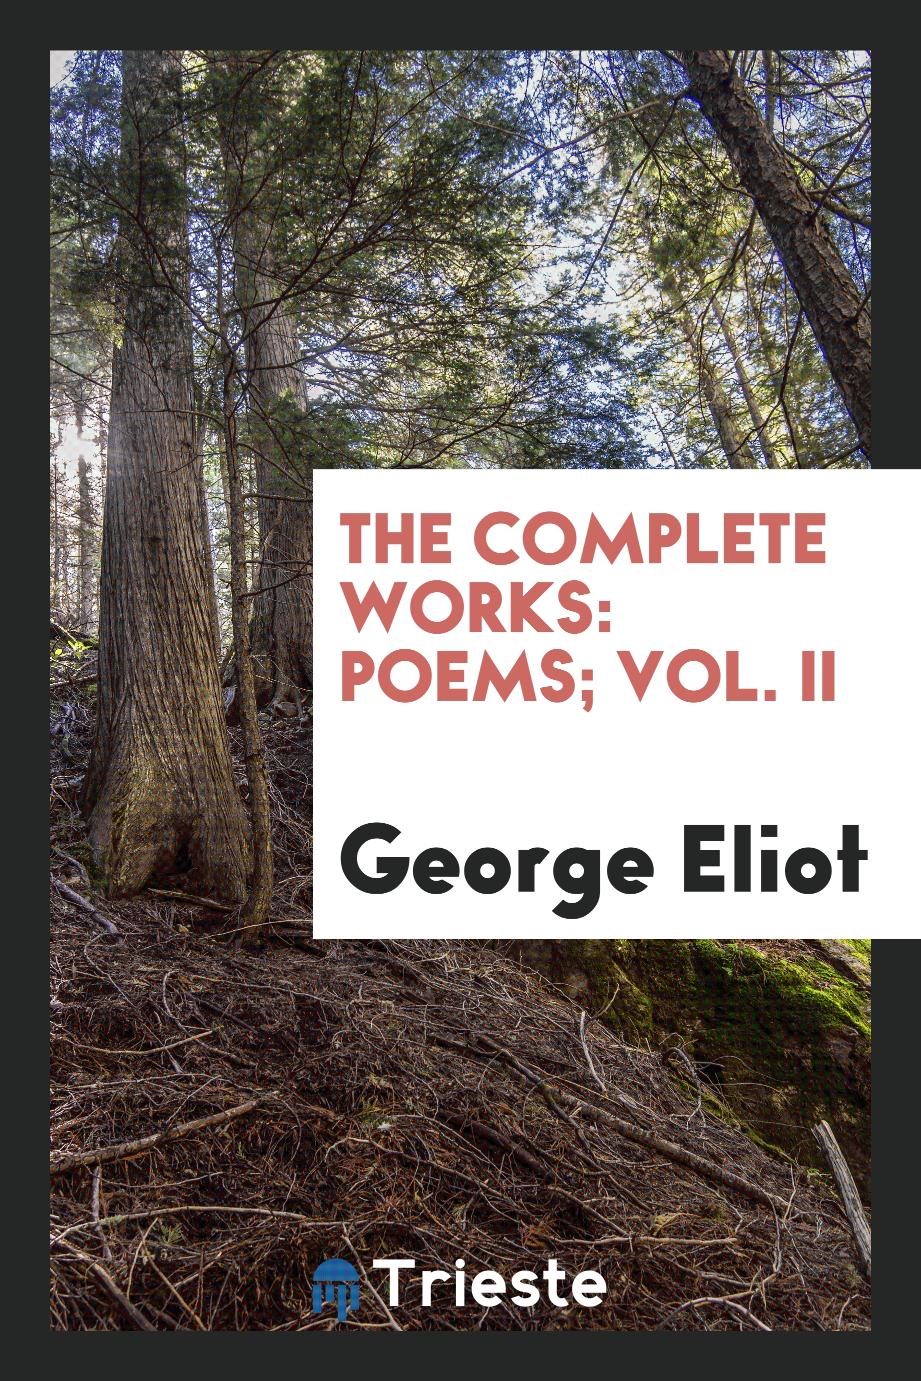 The complete works: Poems; Vol. II